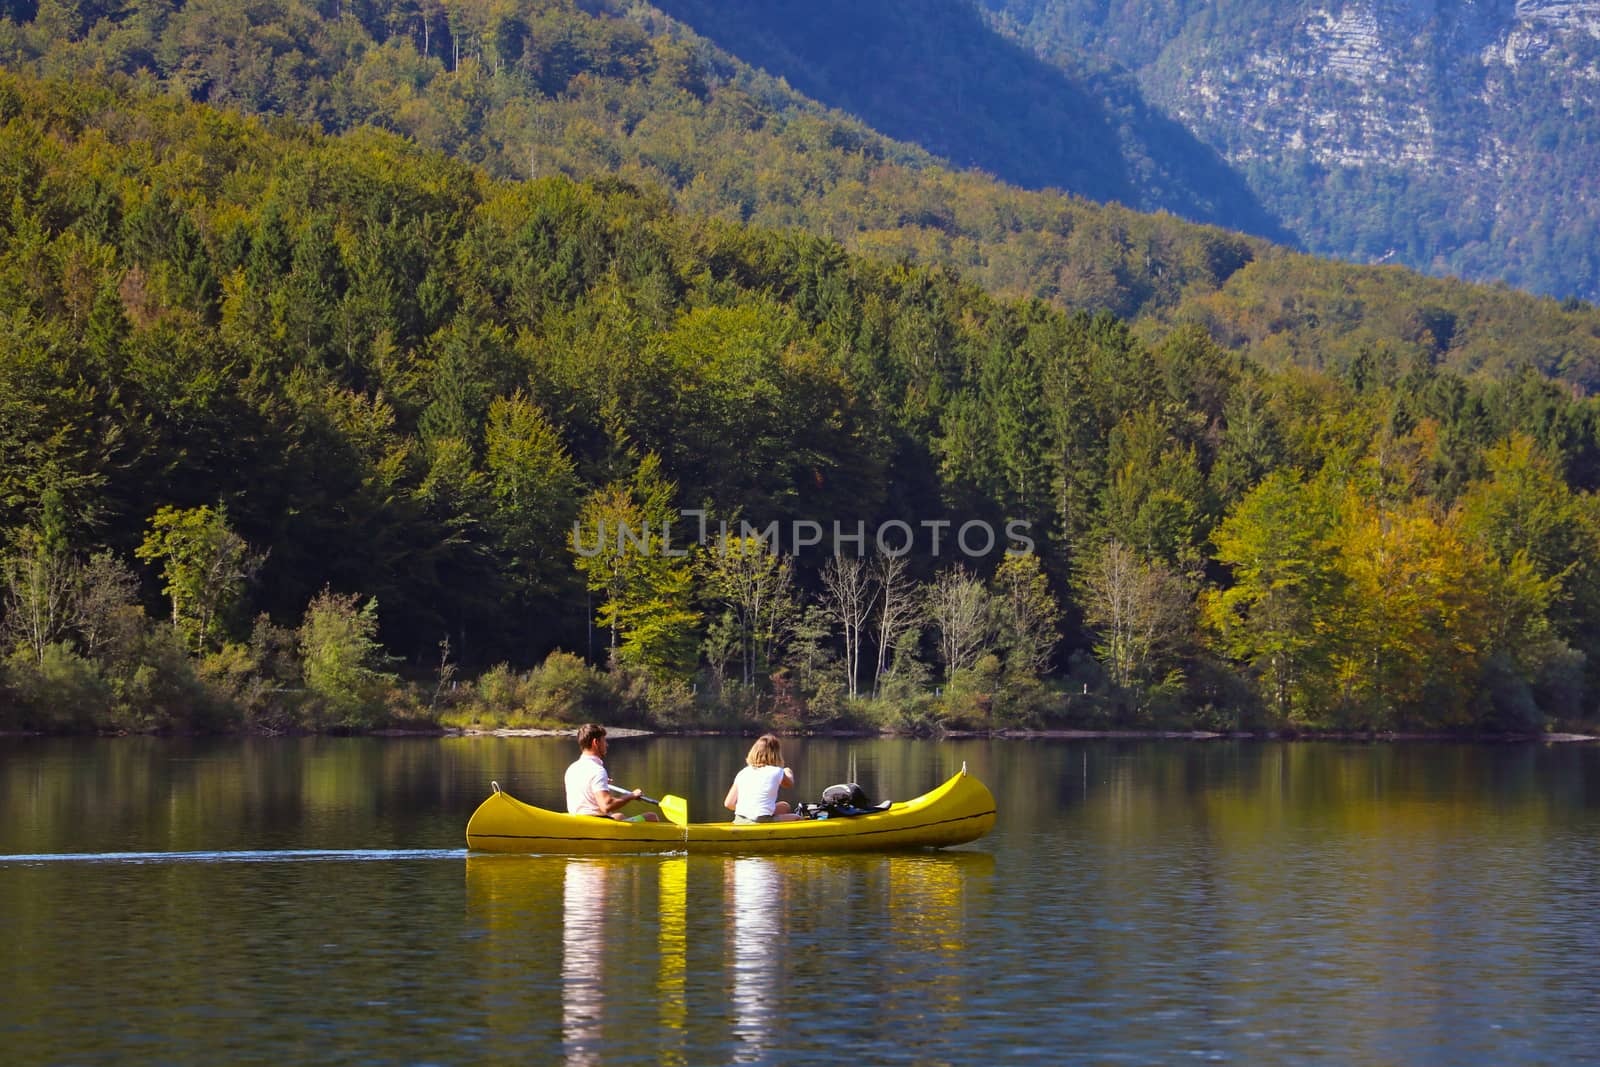 A young couple swims on a boat on a mountain lake or river. by kip02kas